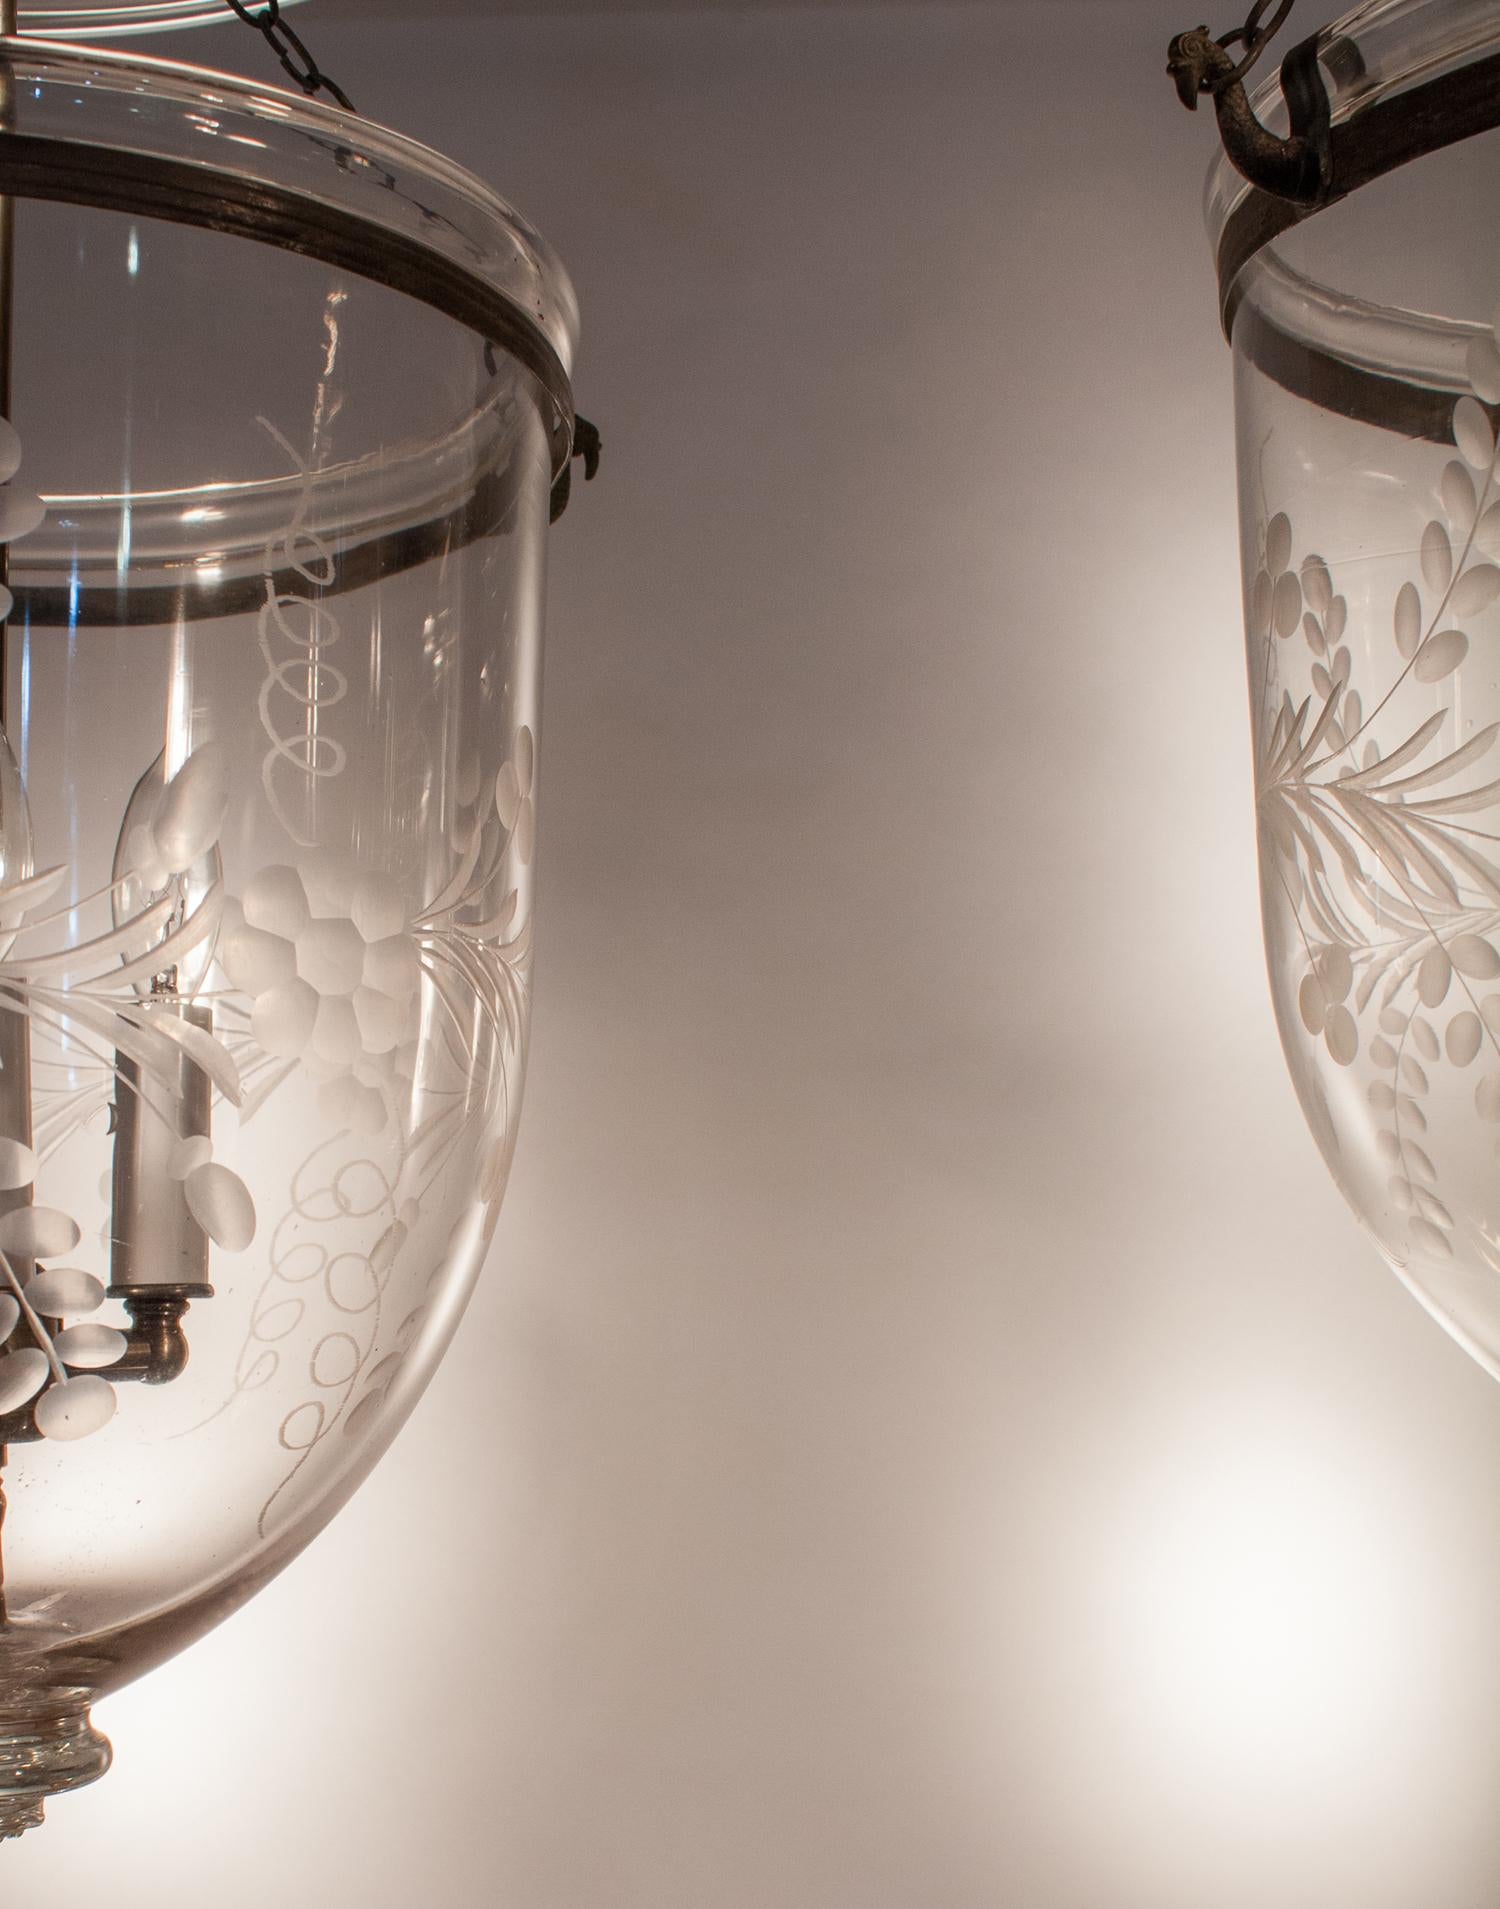 Etched Pair of 19th Century Bell Jar Lanterns with Floral Etching